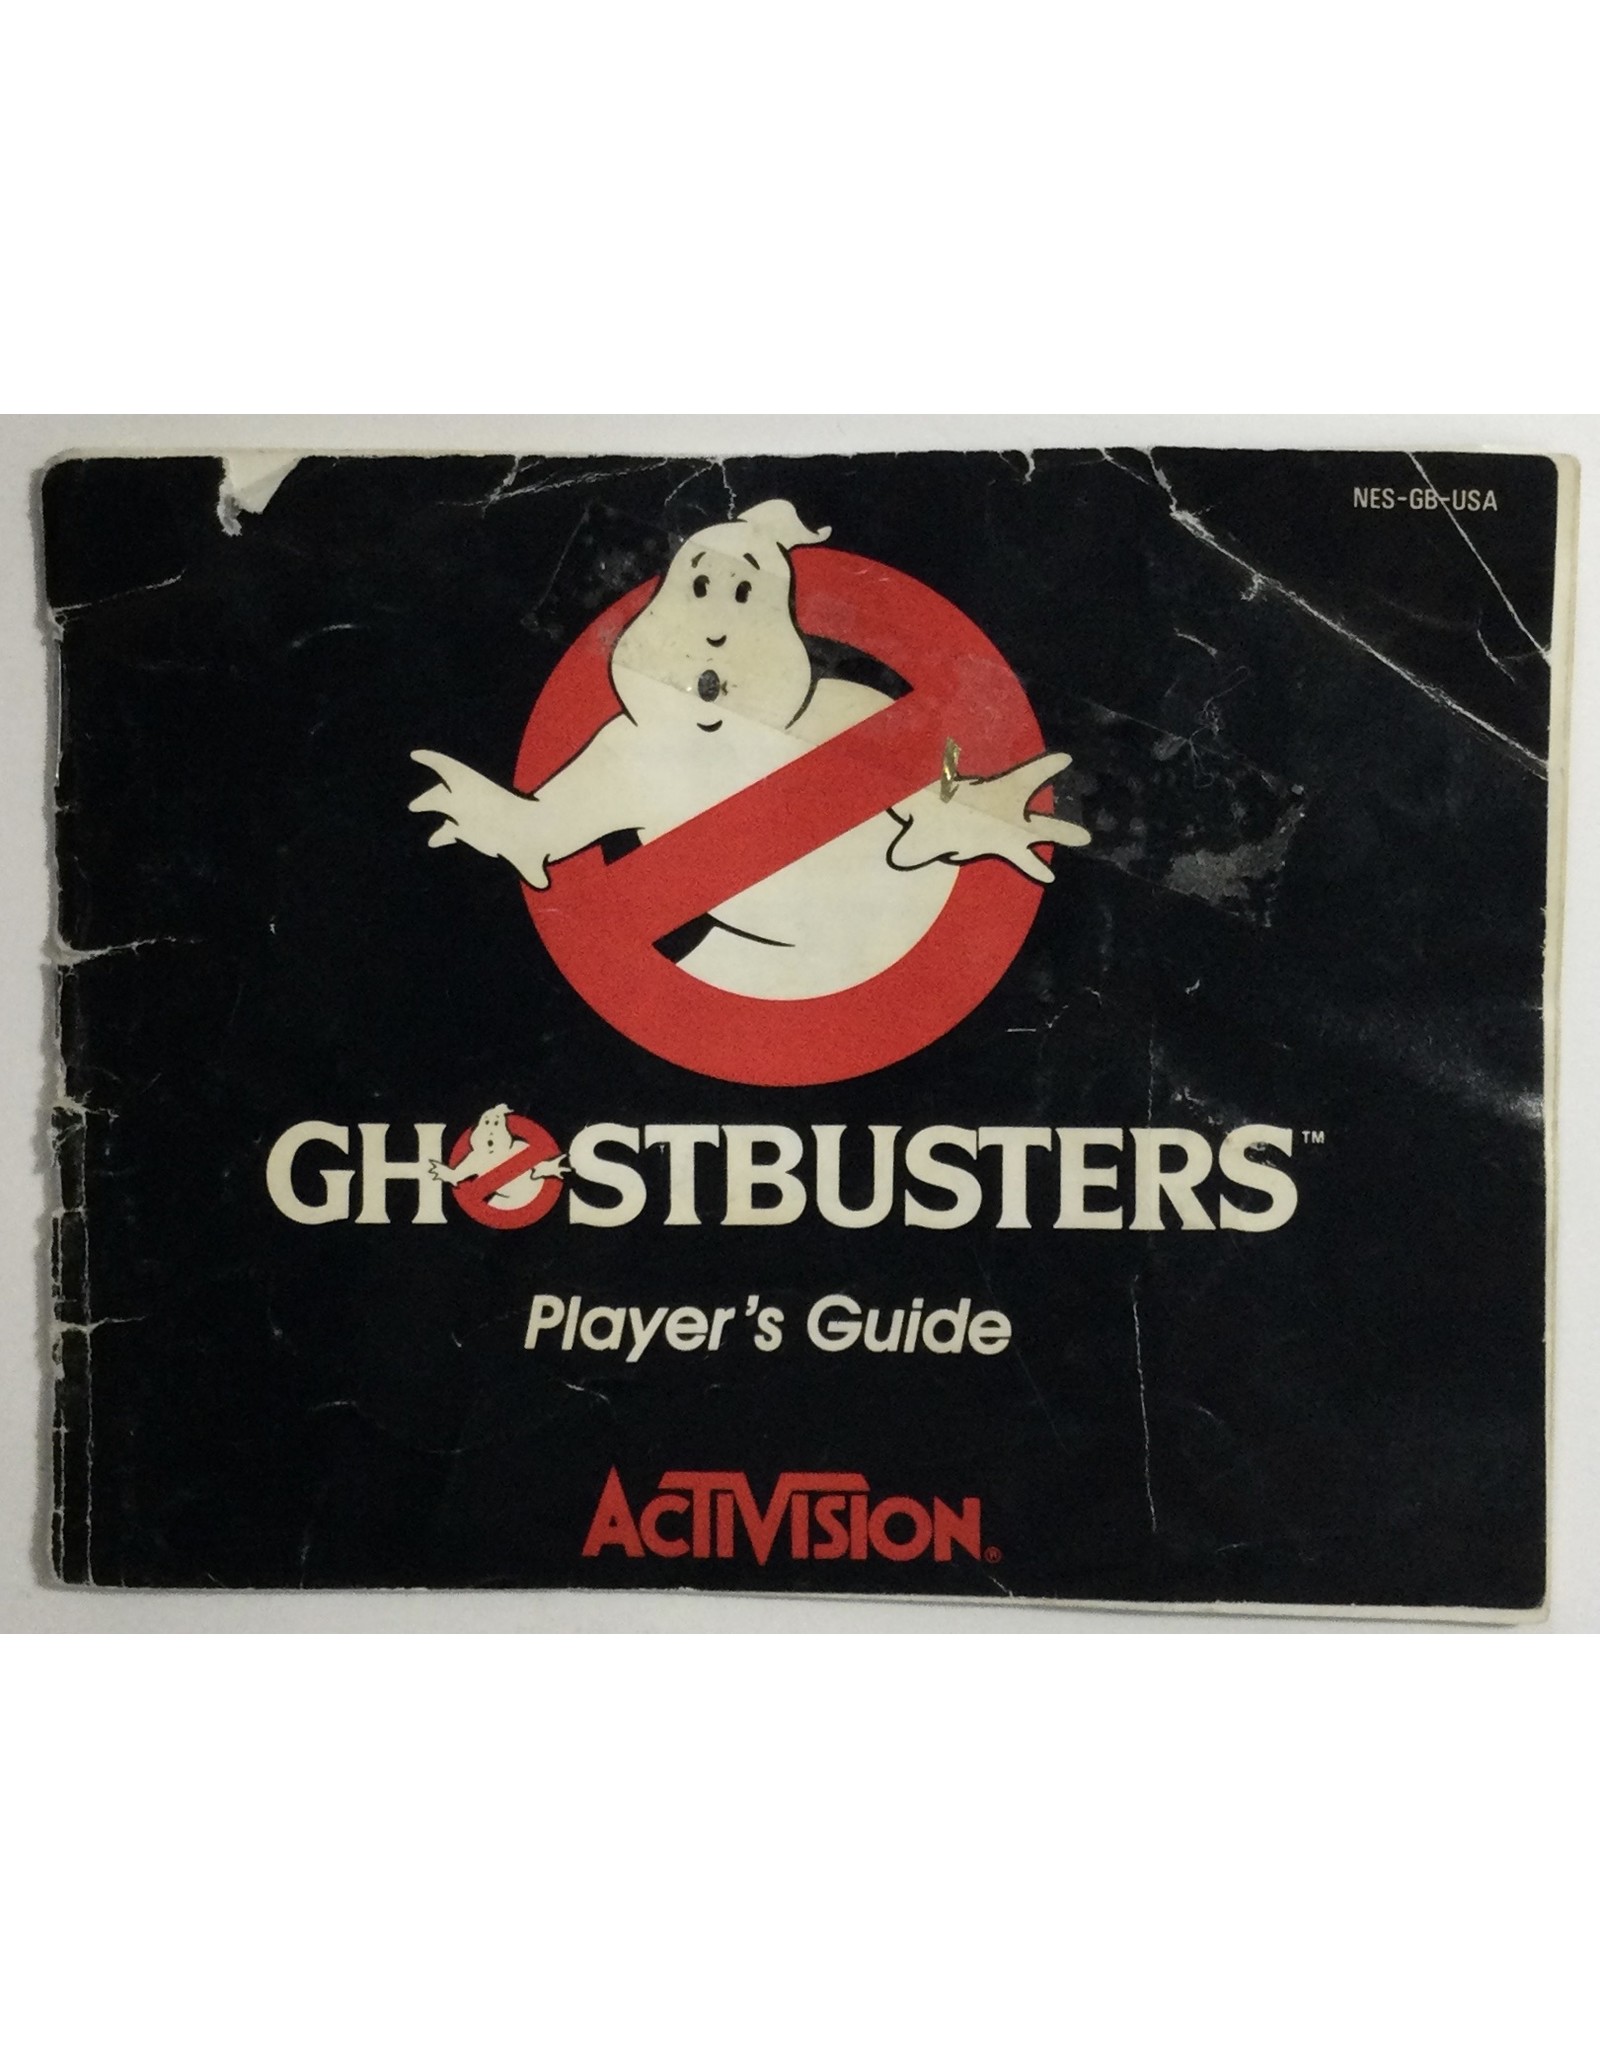 ACTIVISION Ghostbusters for Nintendo Entertainment system (NES)